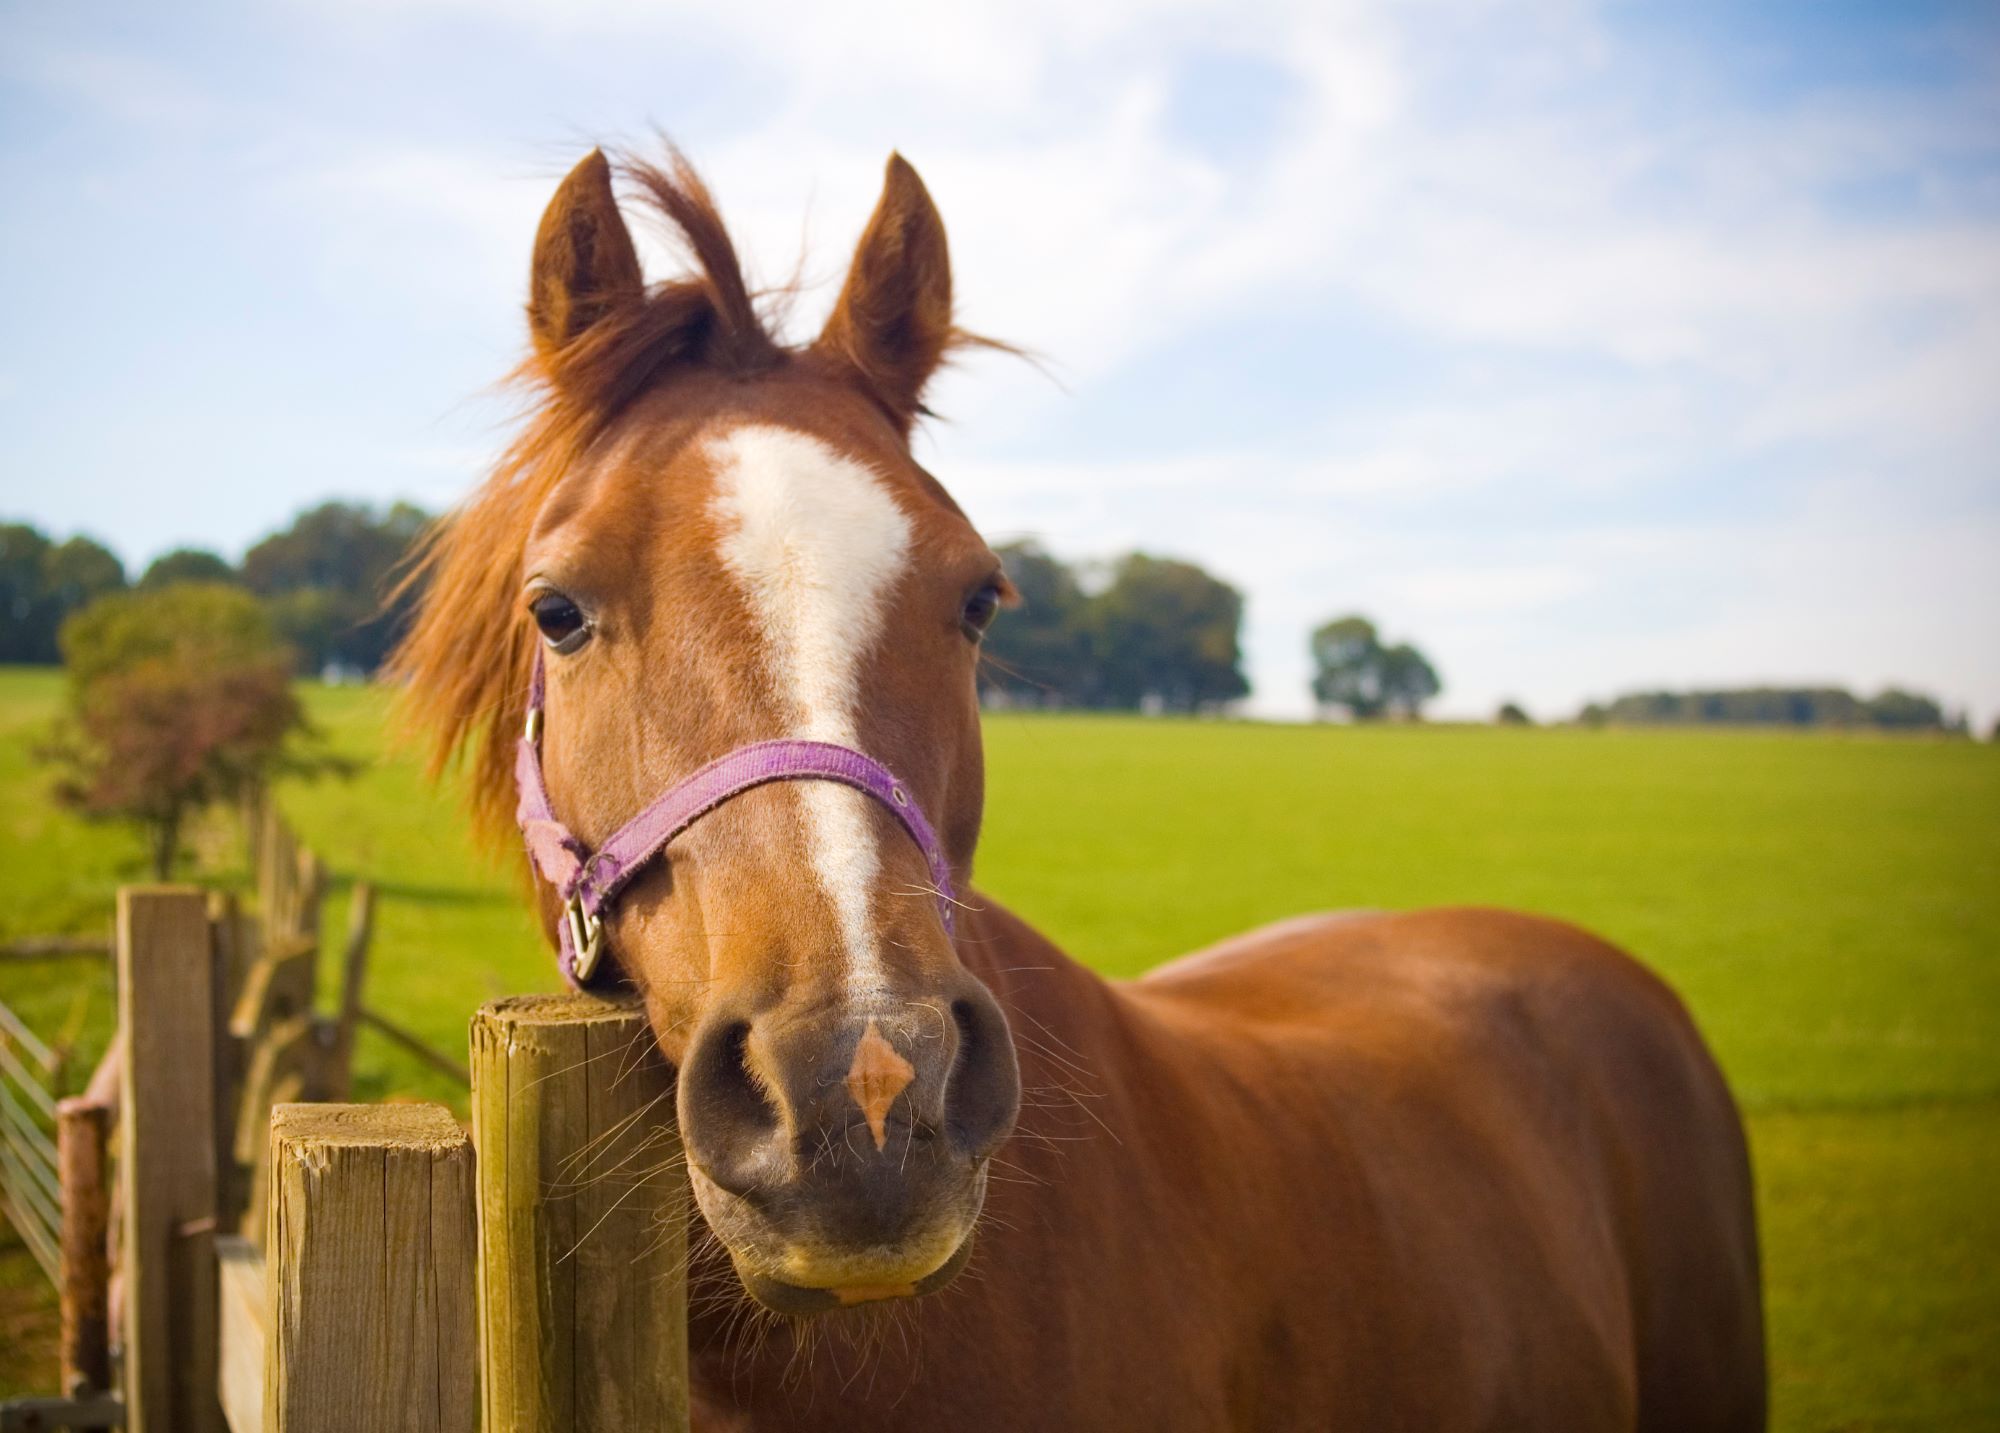 Help End The Suffering, with World Horse Welfare